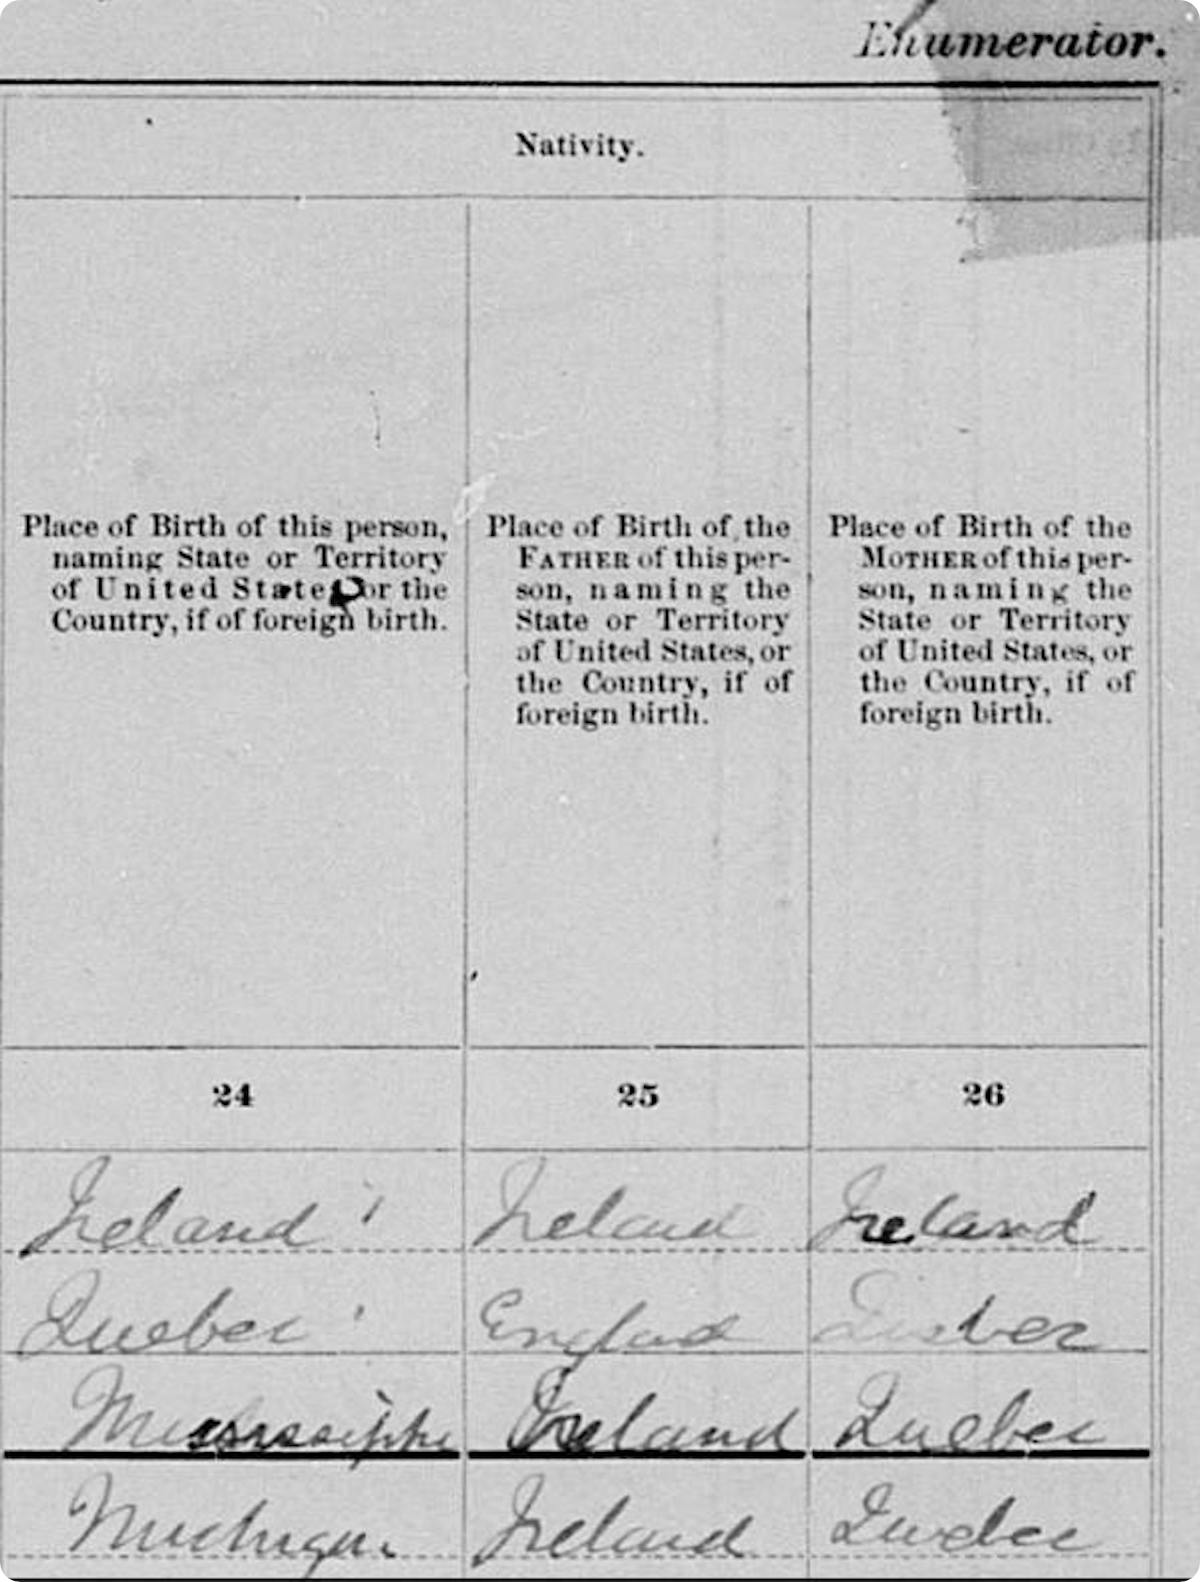 From the 1880 US Census